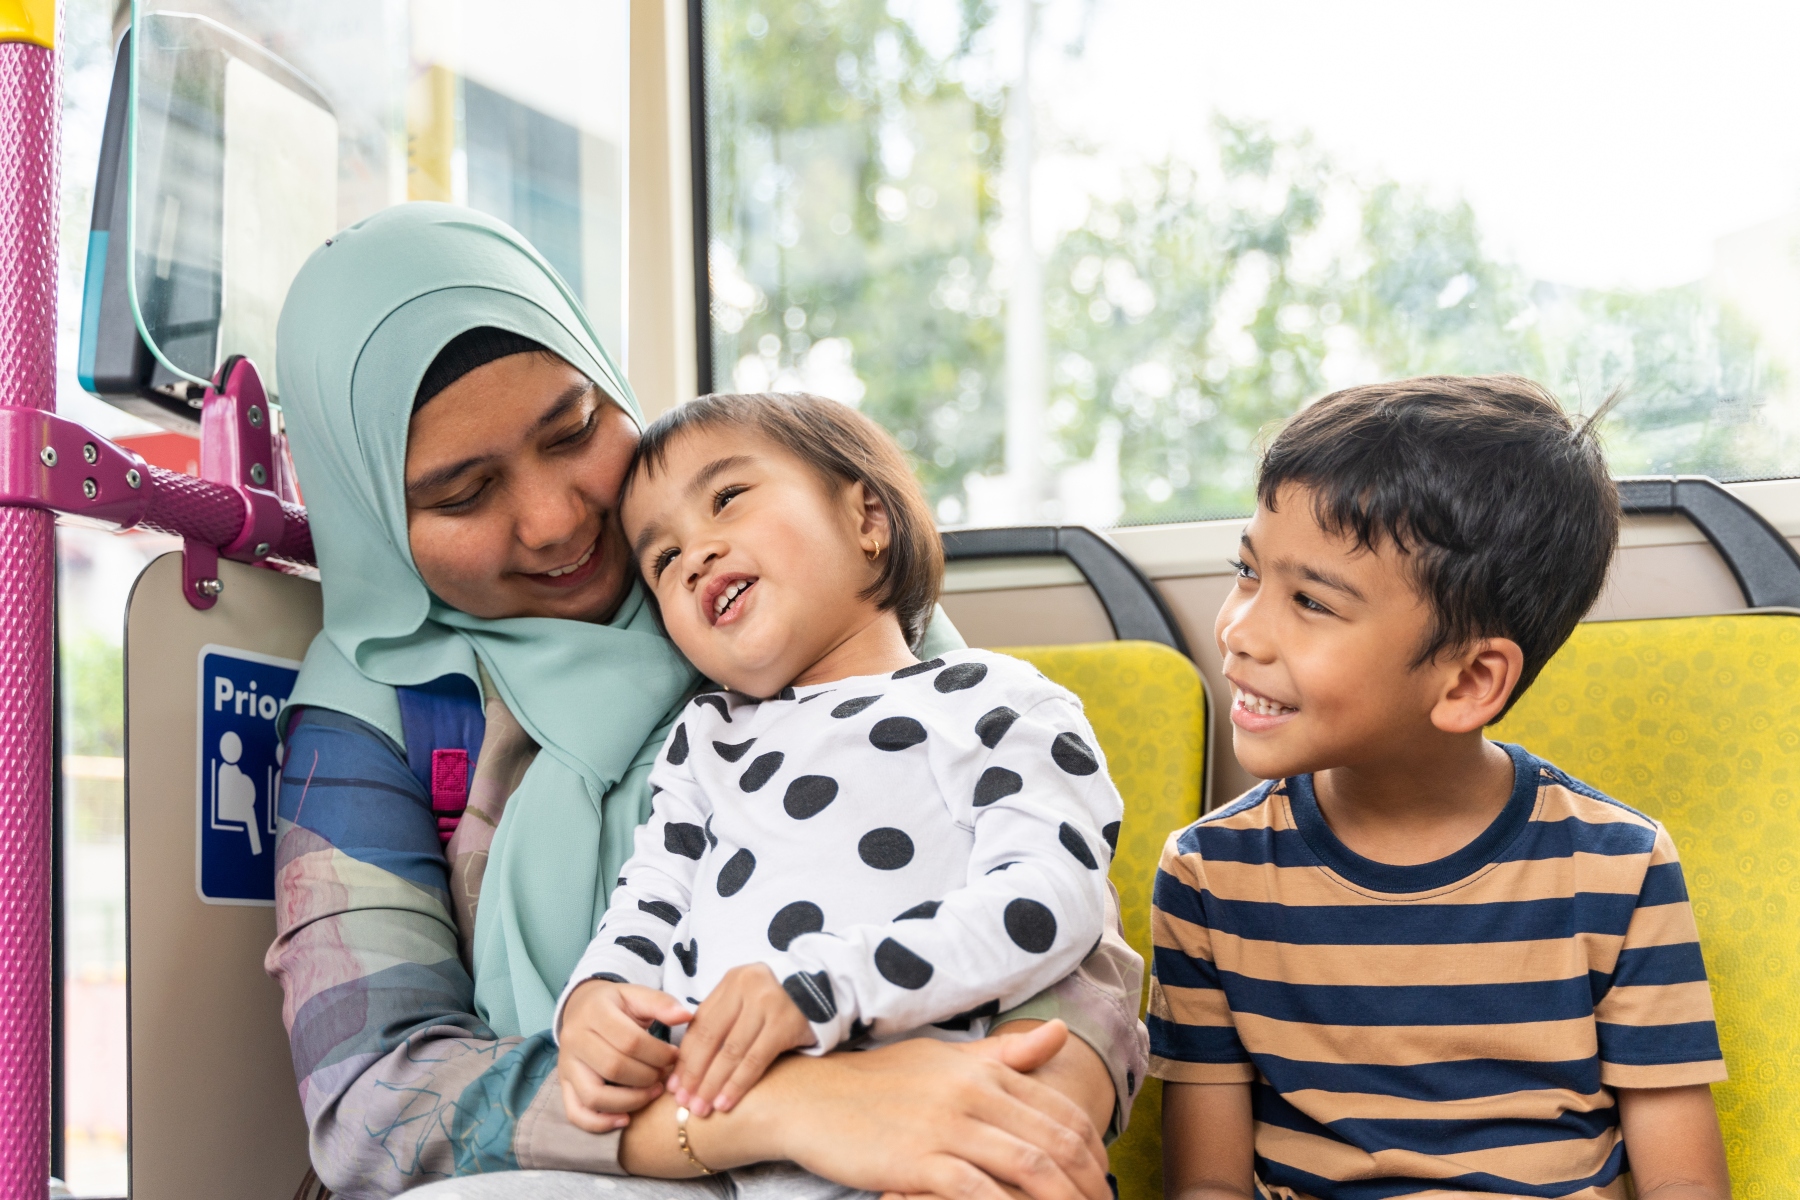 Smiling mother with two young children sit on bus together on the way to school